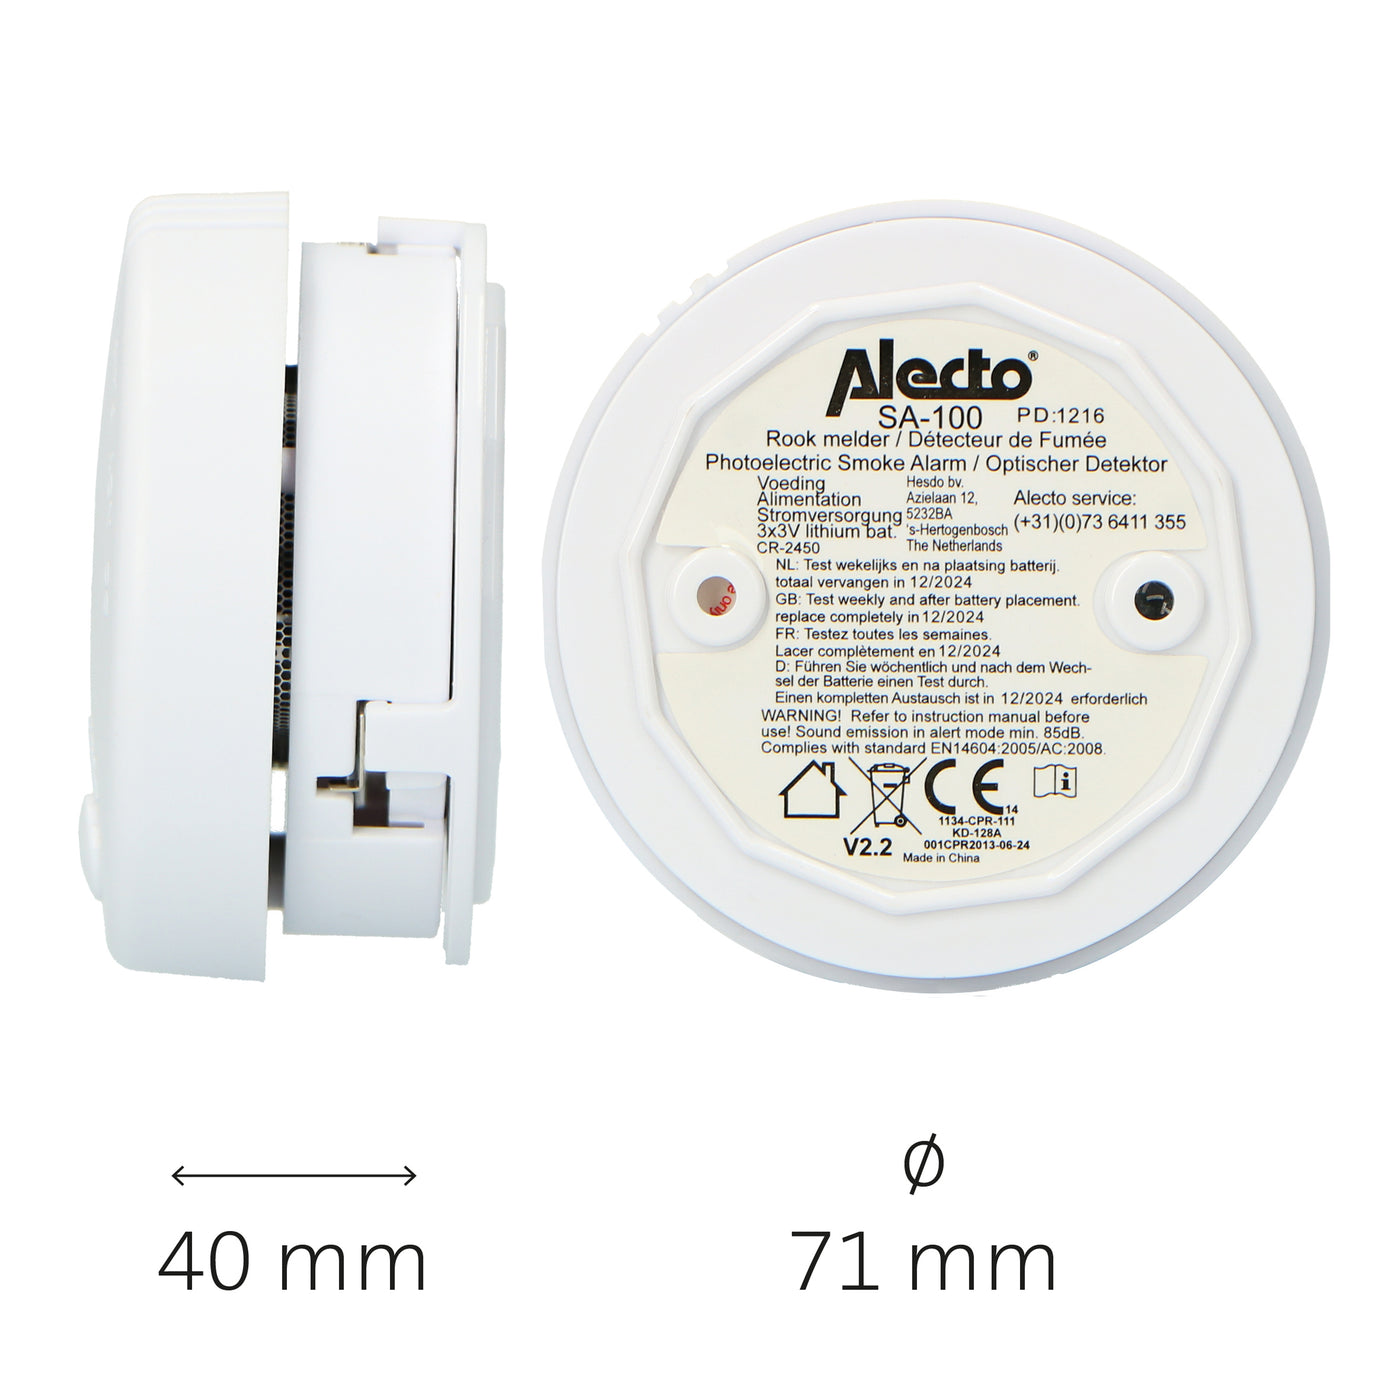 Alecto BPB18 - Fire safety kit with 2 mini smoke detectors and 2 magnetic mounting plates